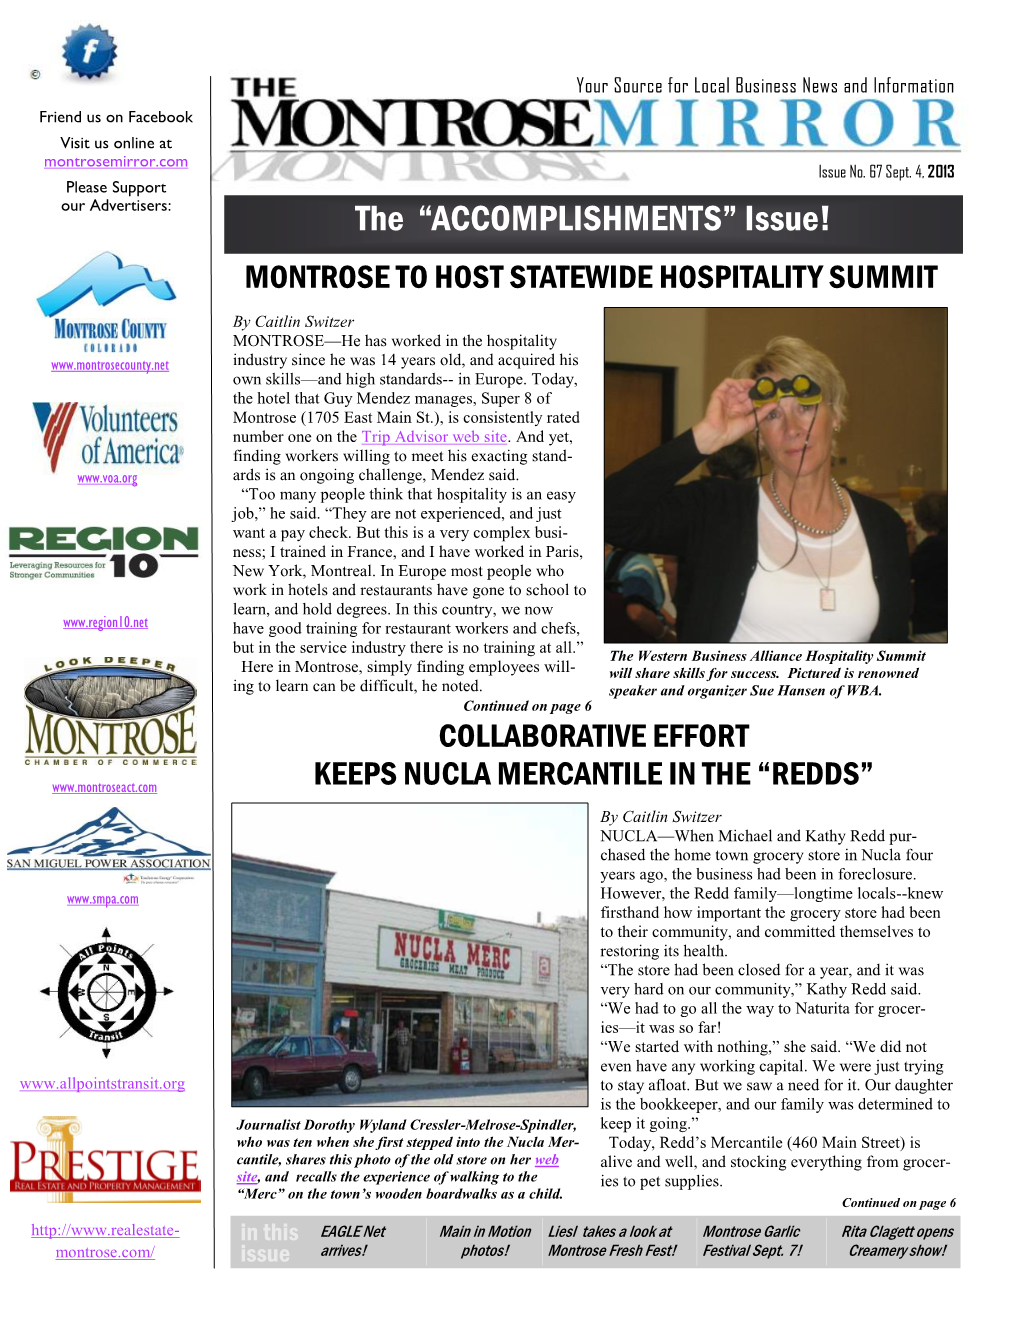 The “ACCOMPLISHMENTS” Issue! MONTROSE to HOST STATEWIDE HOSPITALITY SUMMIT